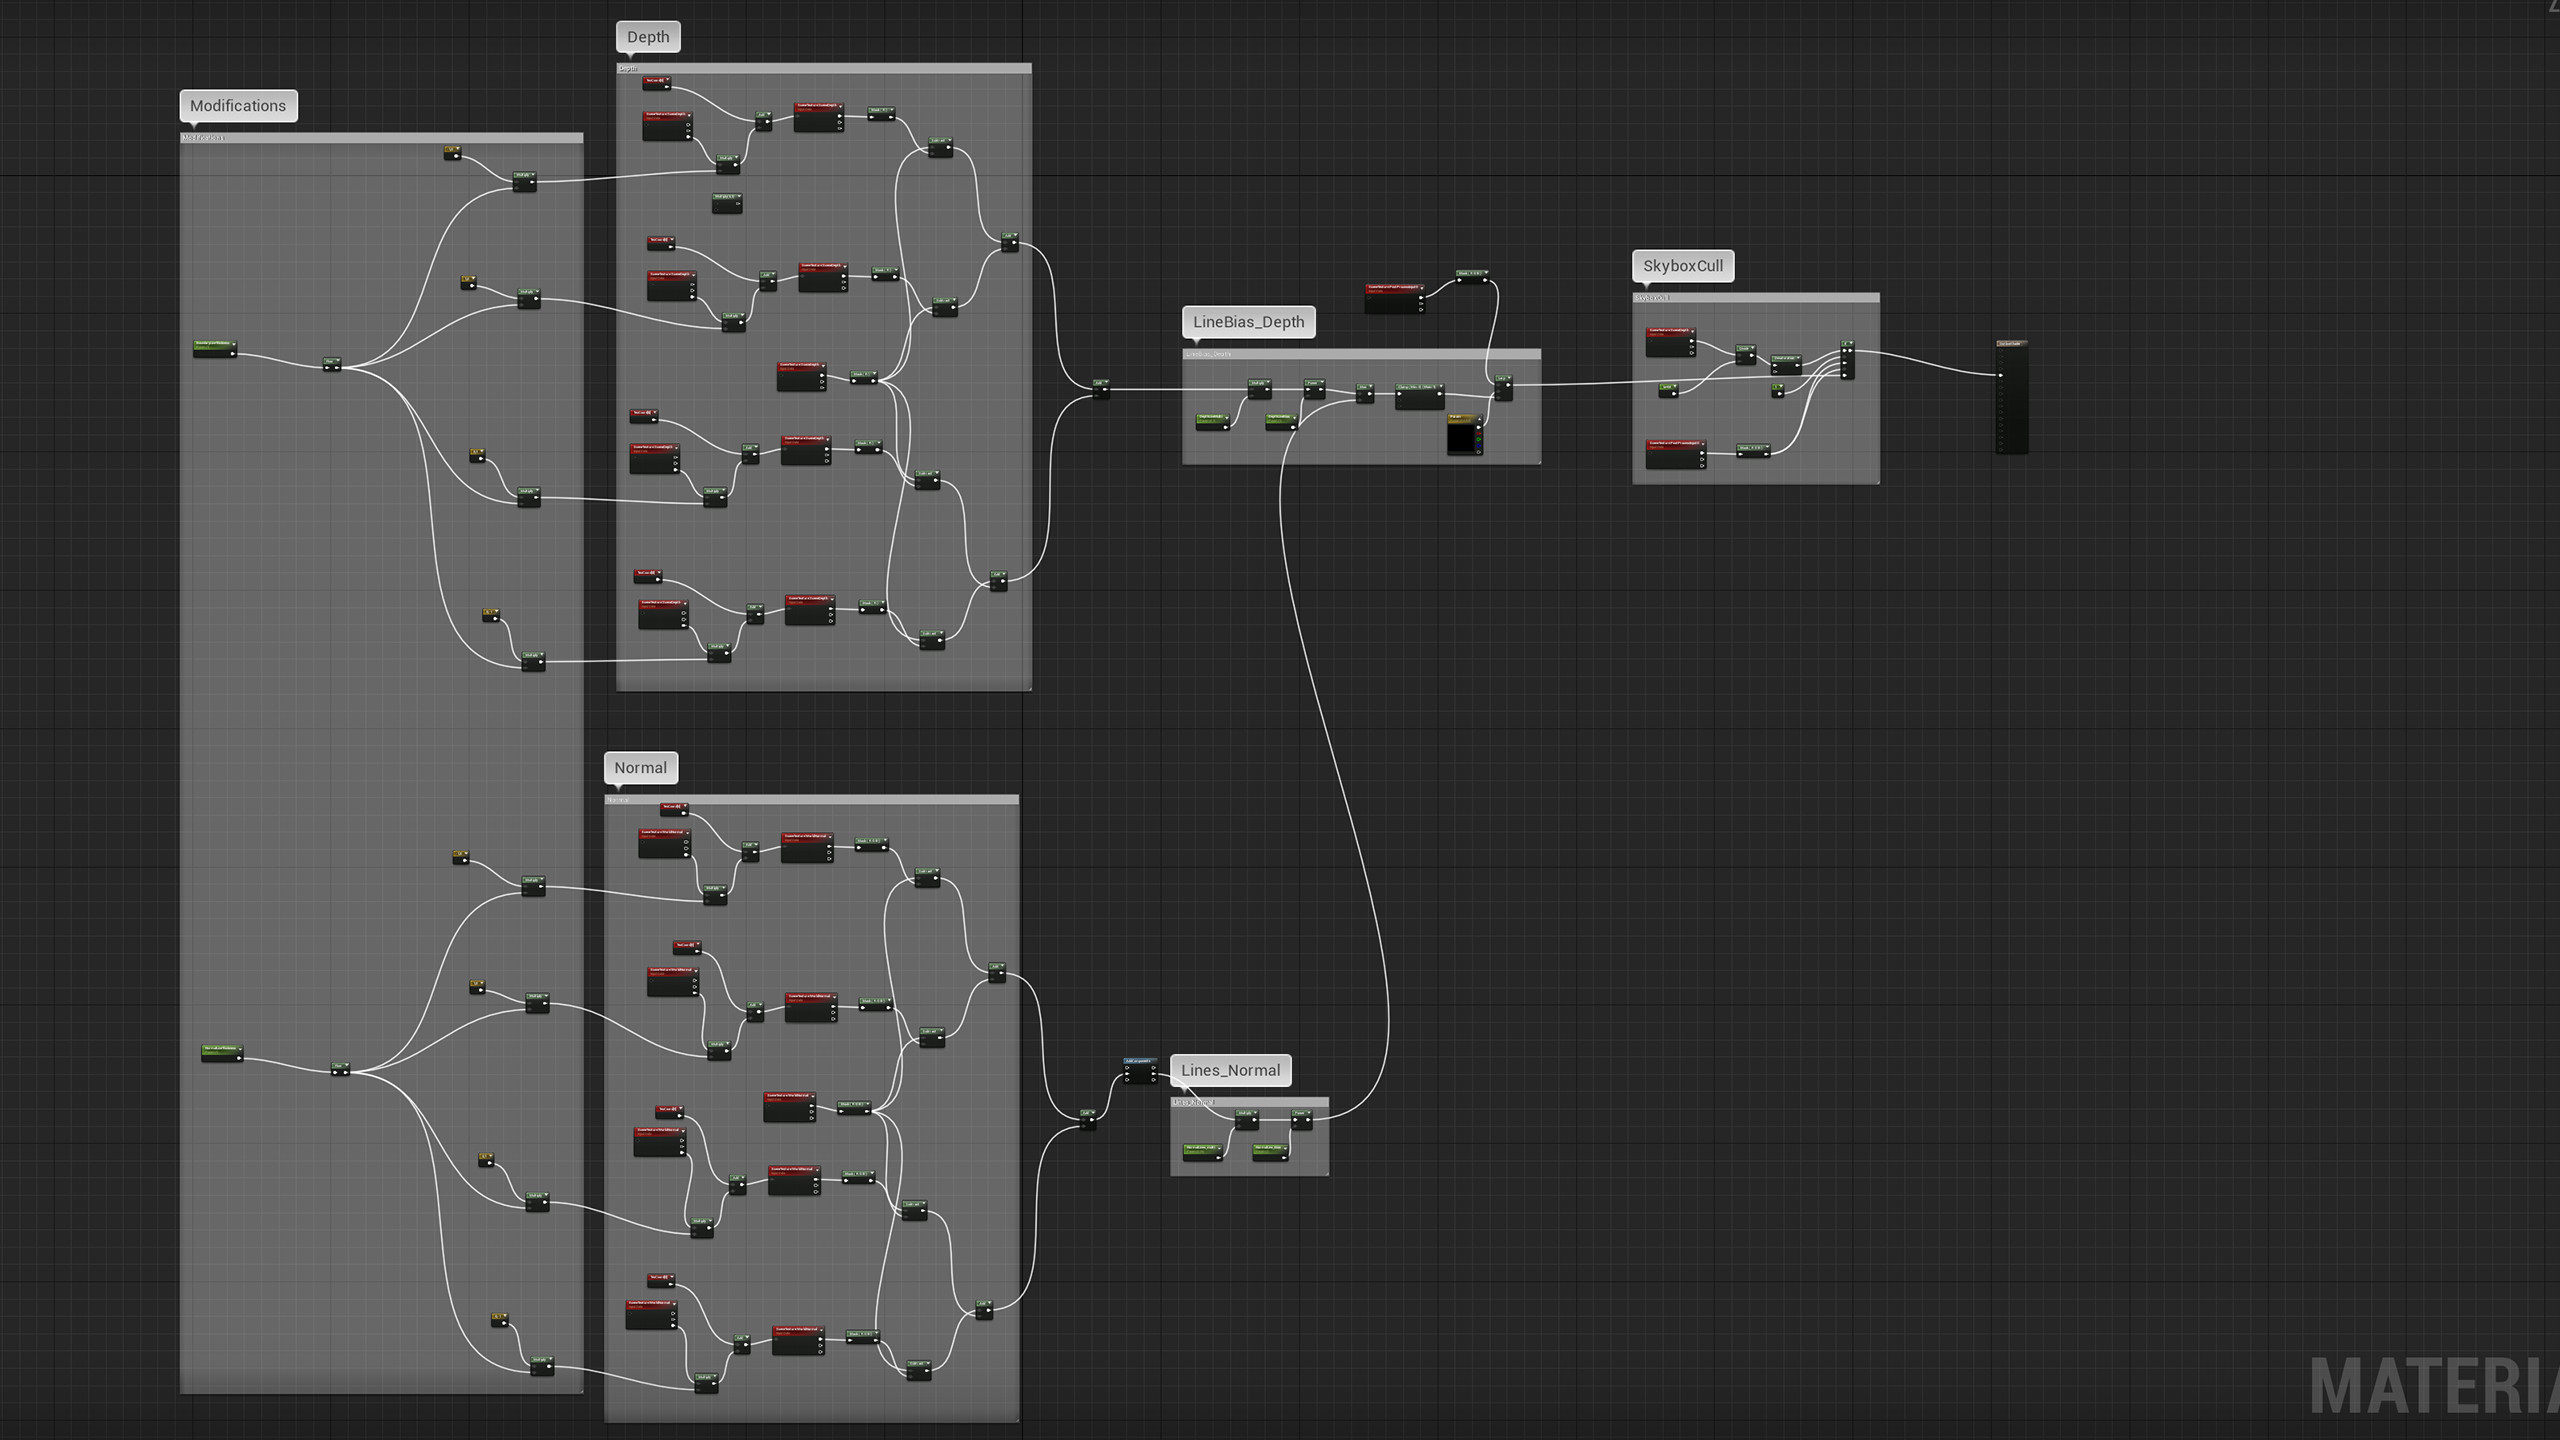 Outline shader setup, for more detail, consult Epic's excellent walk-through of their setup : https://www.youtube.com/watch?v=cQw1CL0xYBE&amp;t=3447s